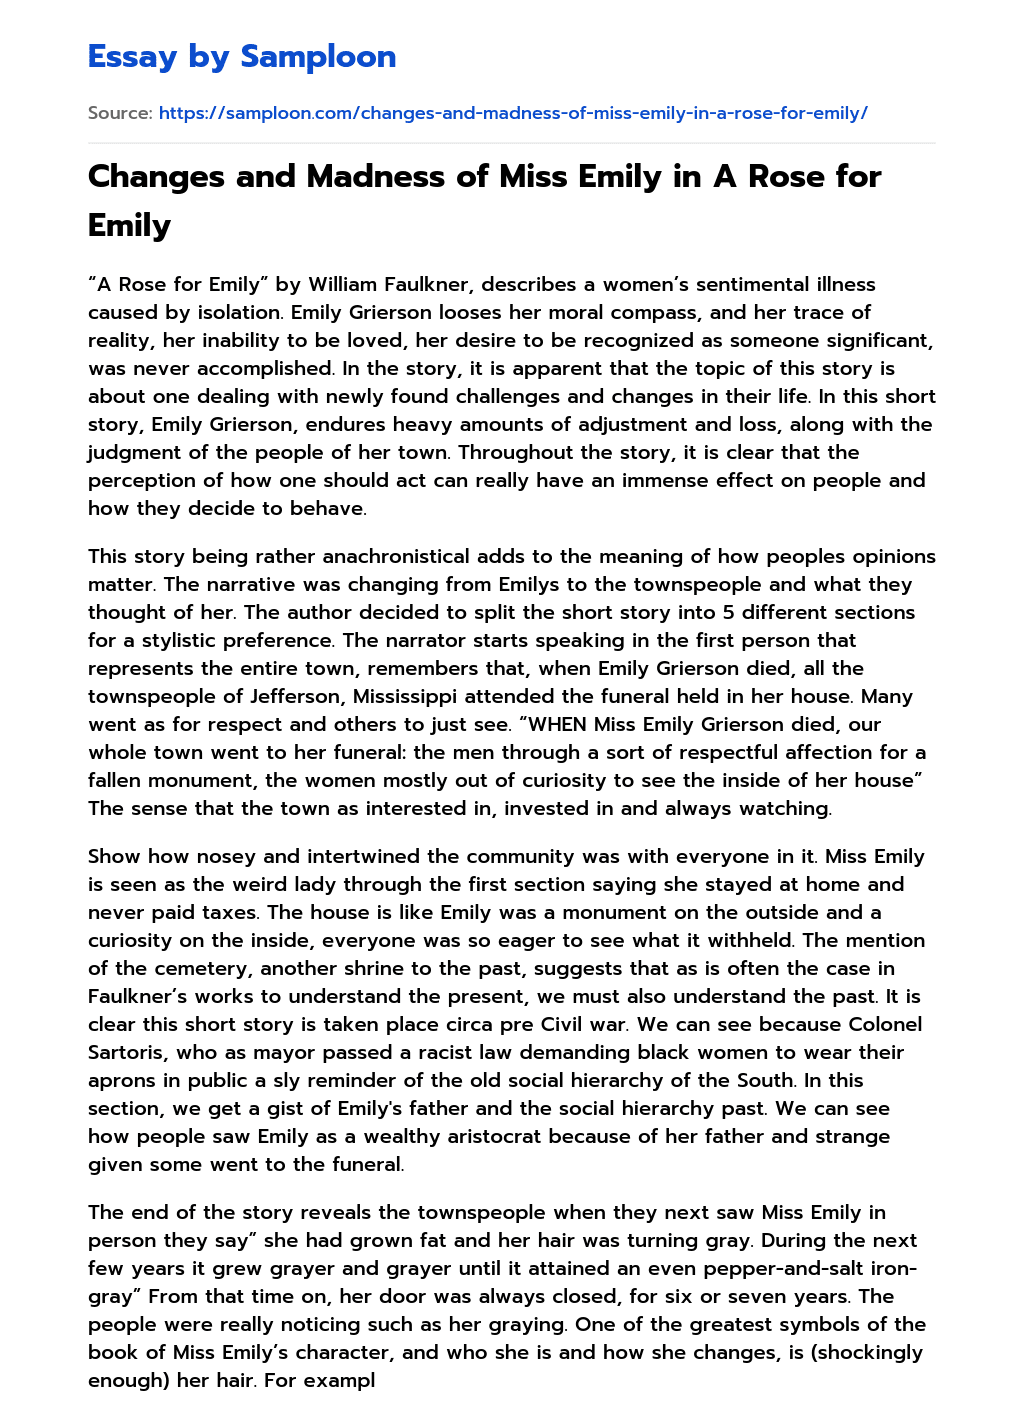 Changes and Madness of Miss Emily in A Rose for Emily essay